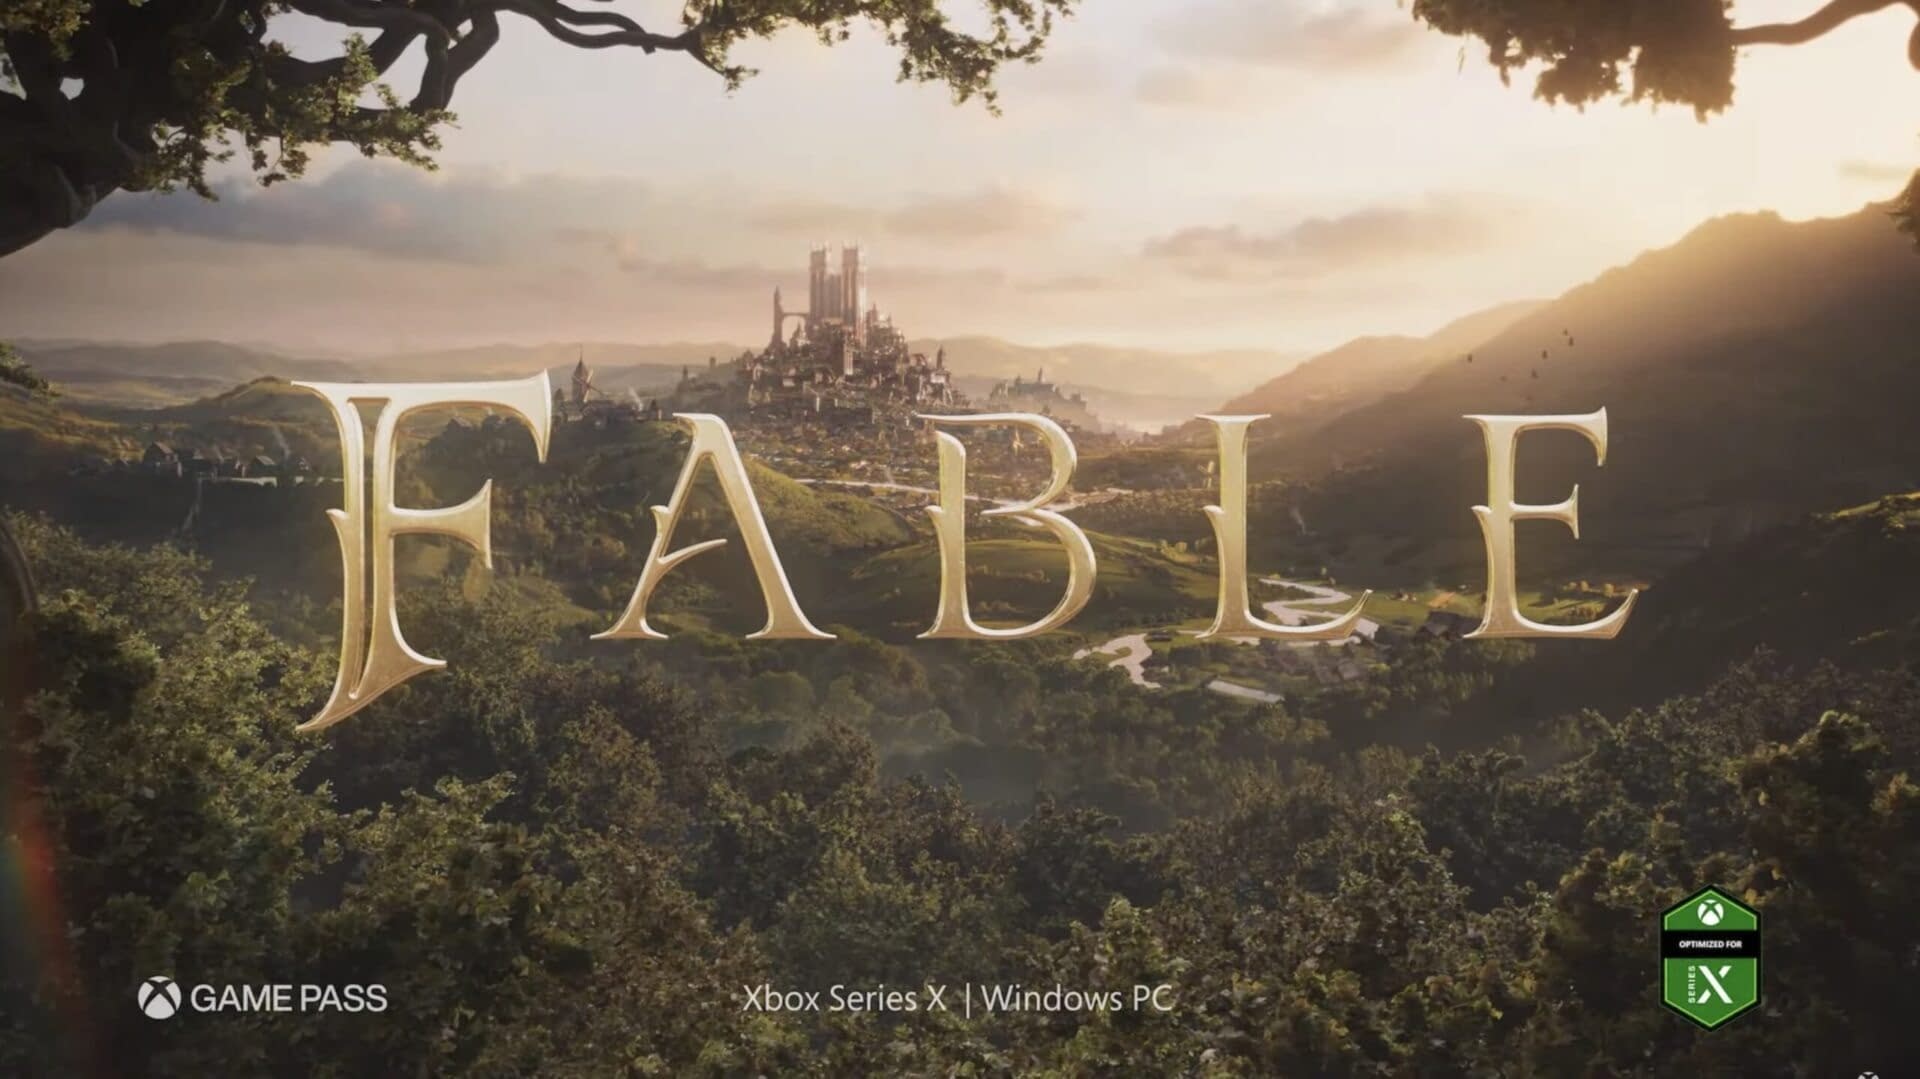 Will Xbox Games Event Show New Fable Game?